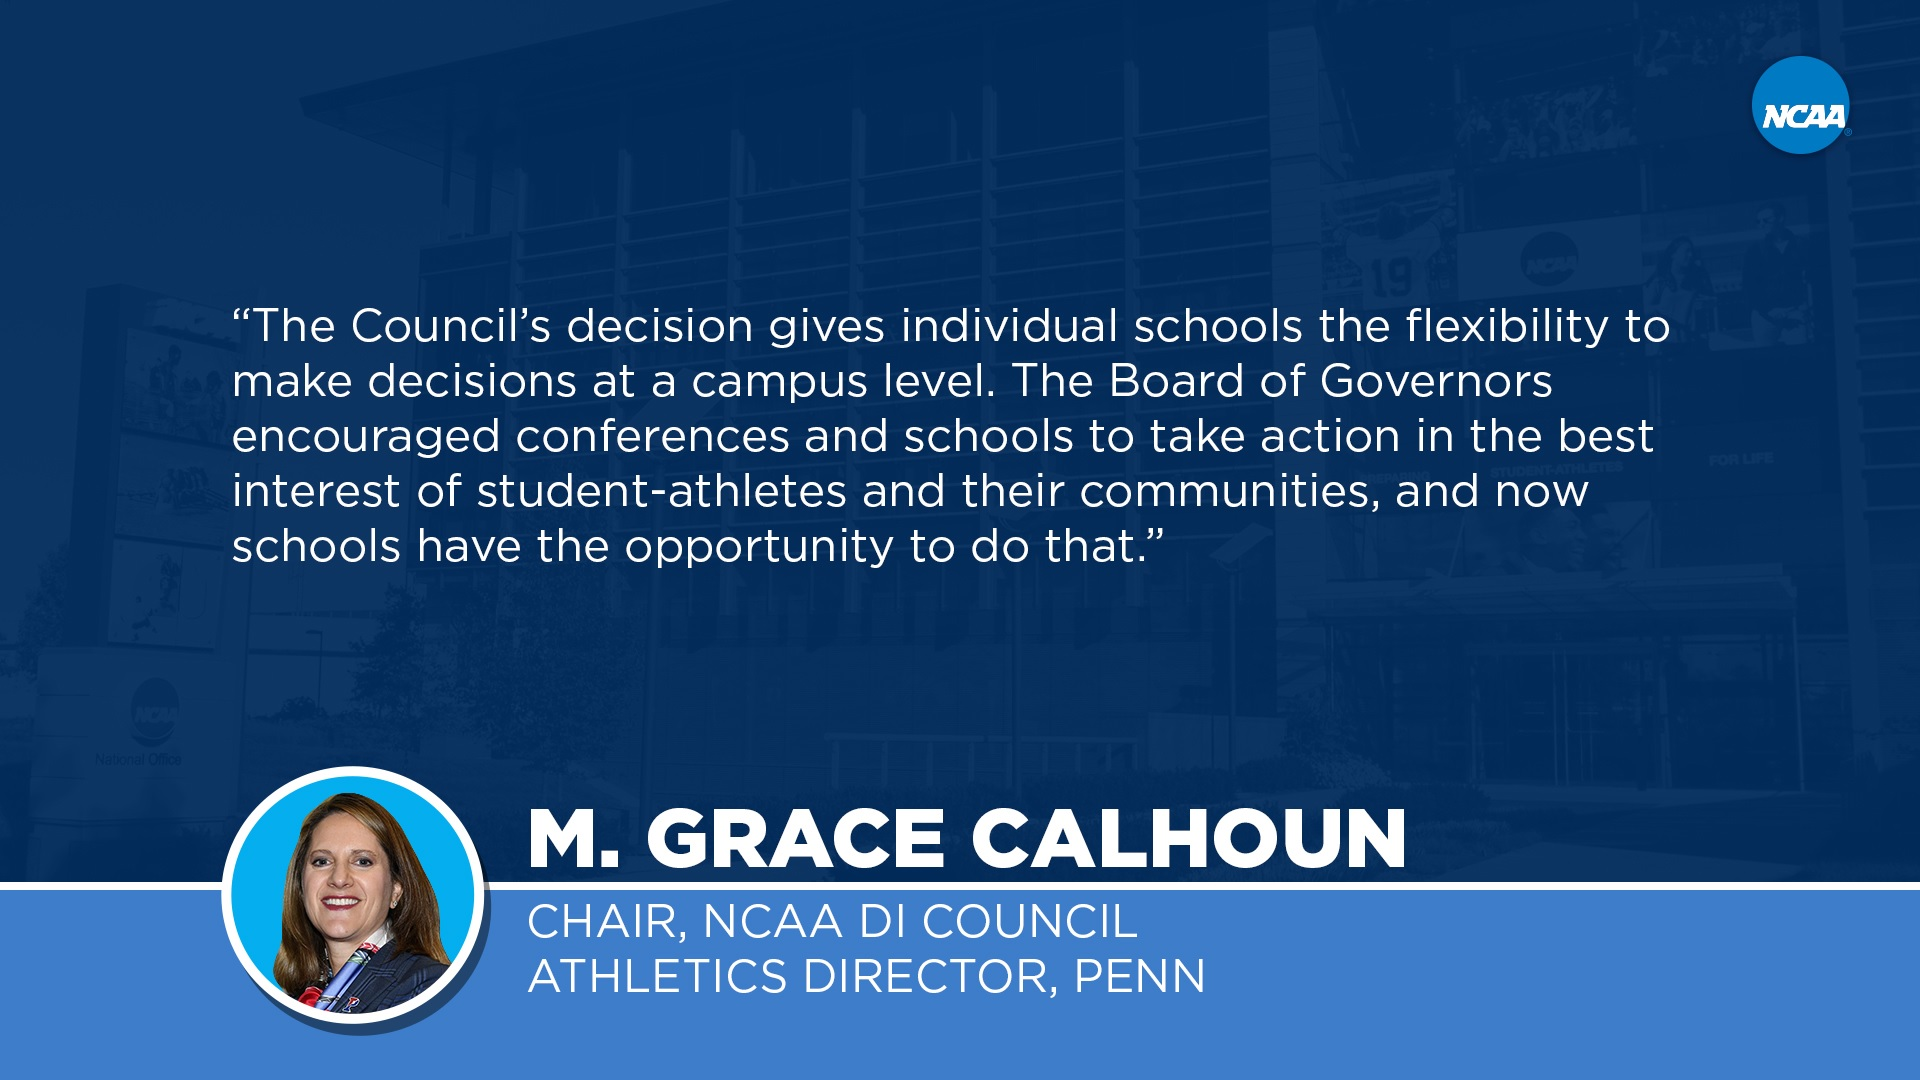 D-I Council Extends Eligibility for Student-Athletes Impacted by COVID-19